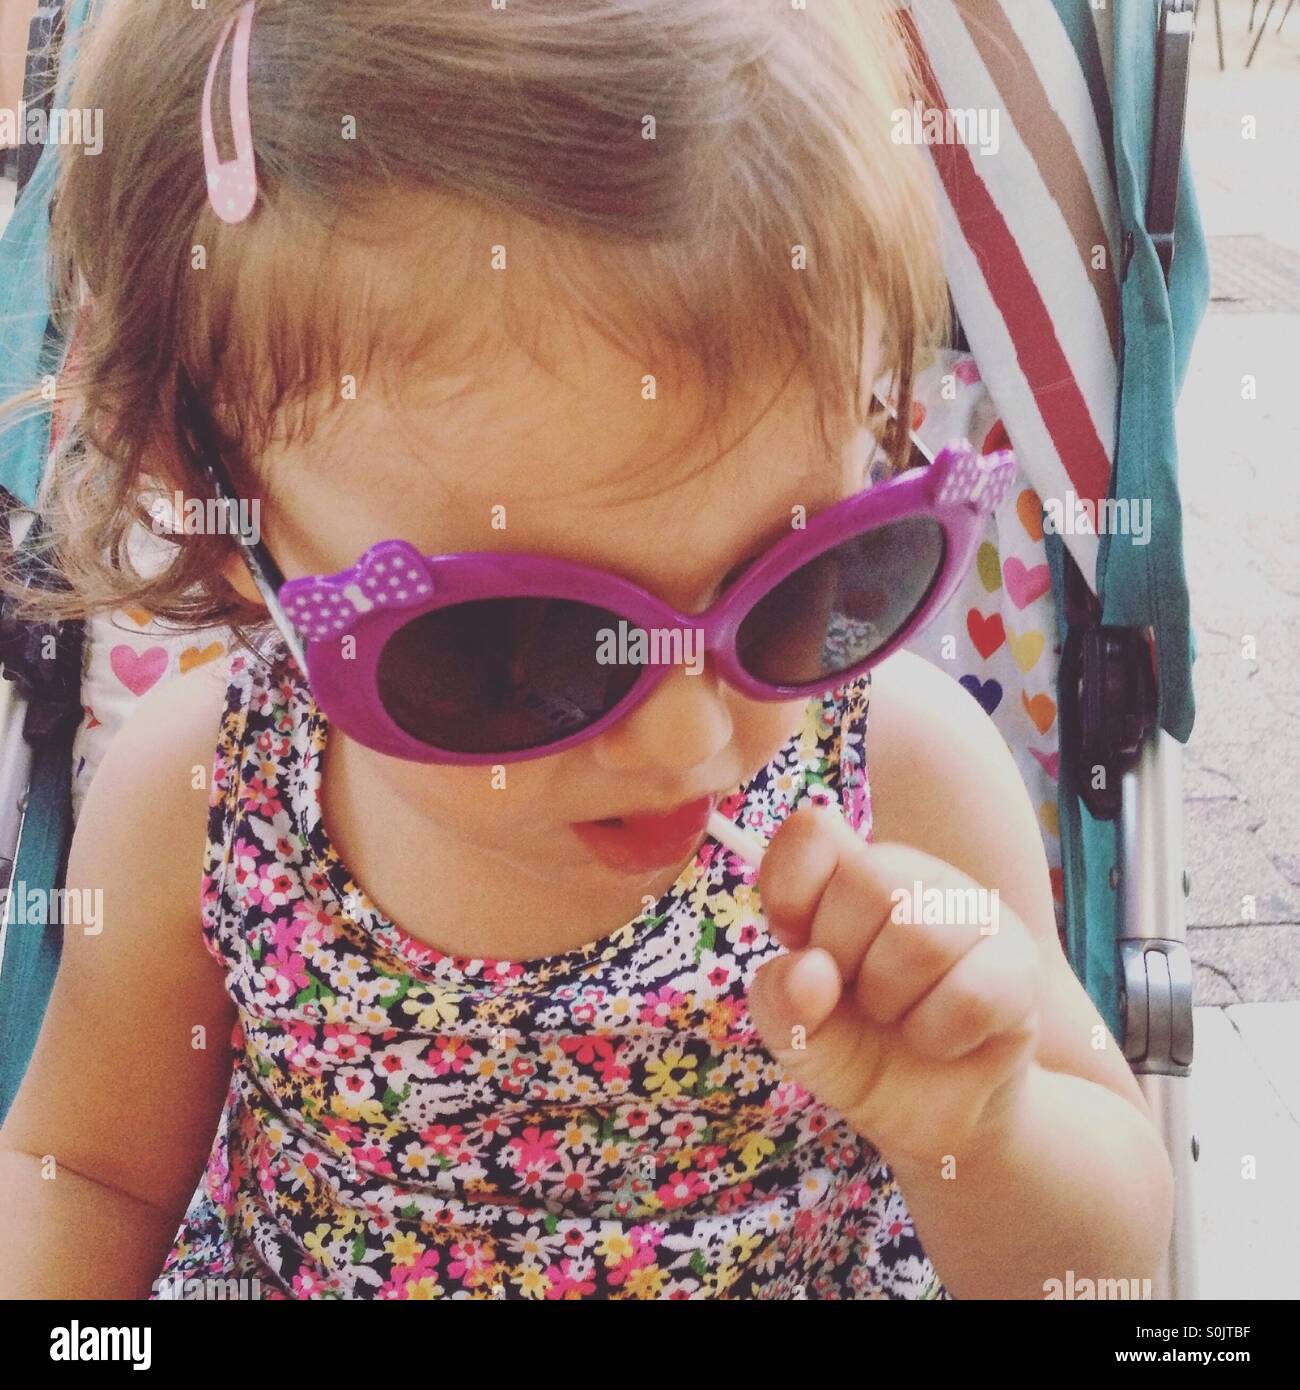 Baby girl with sunglasses and lollipop in mouth Stock Photo